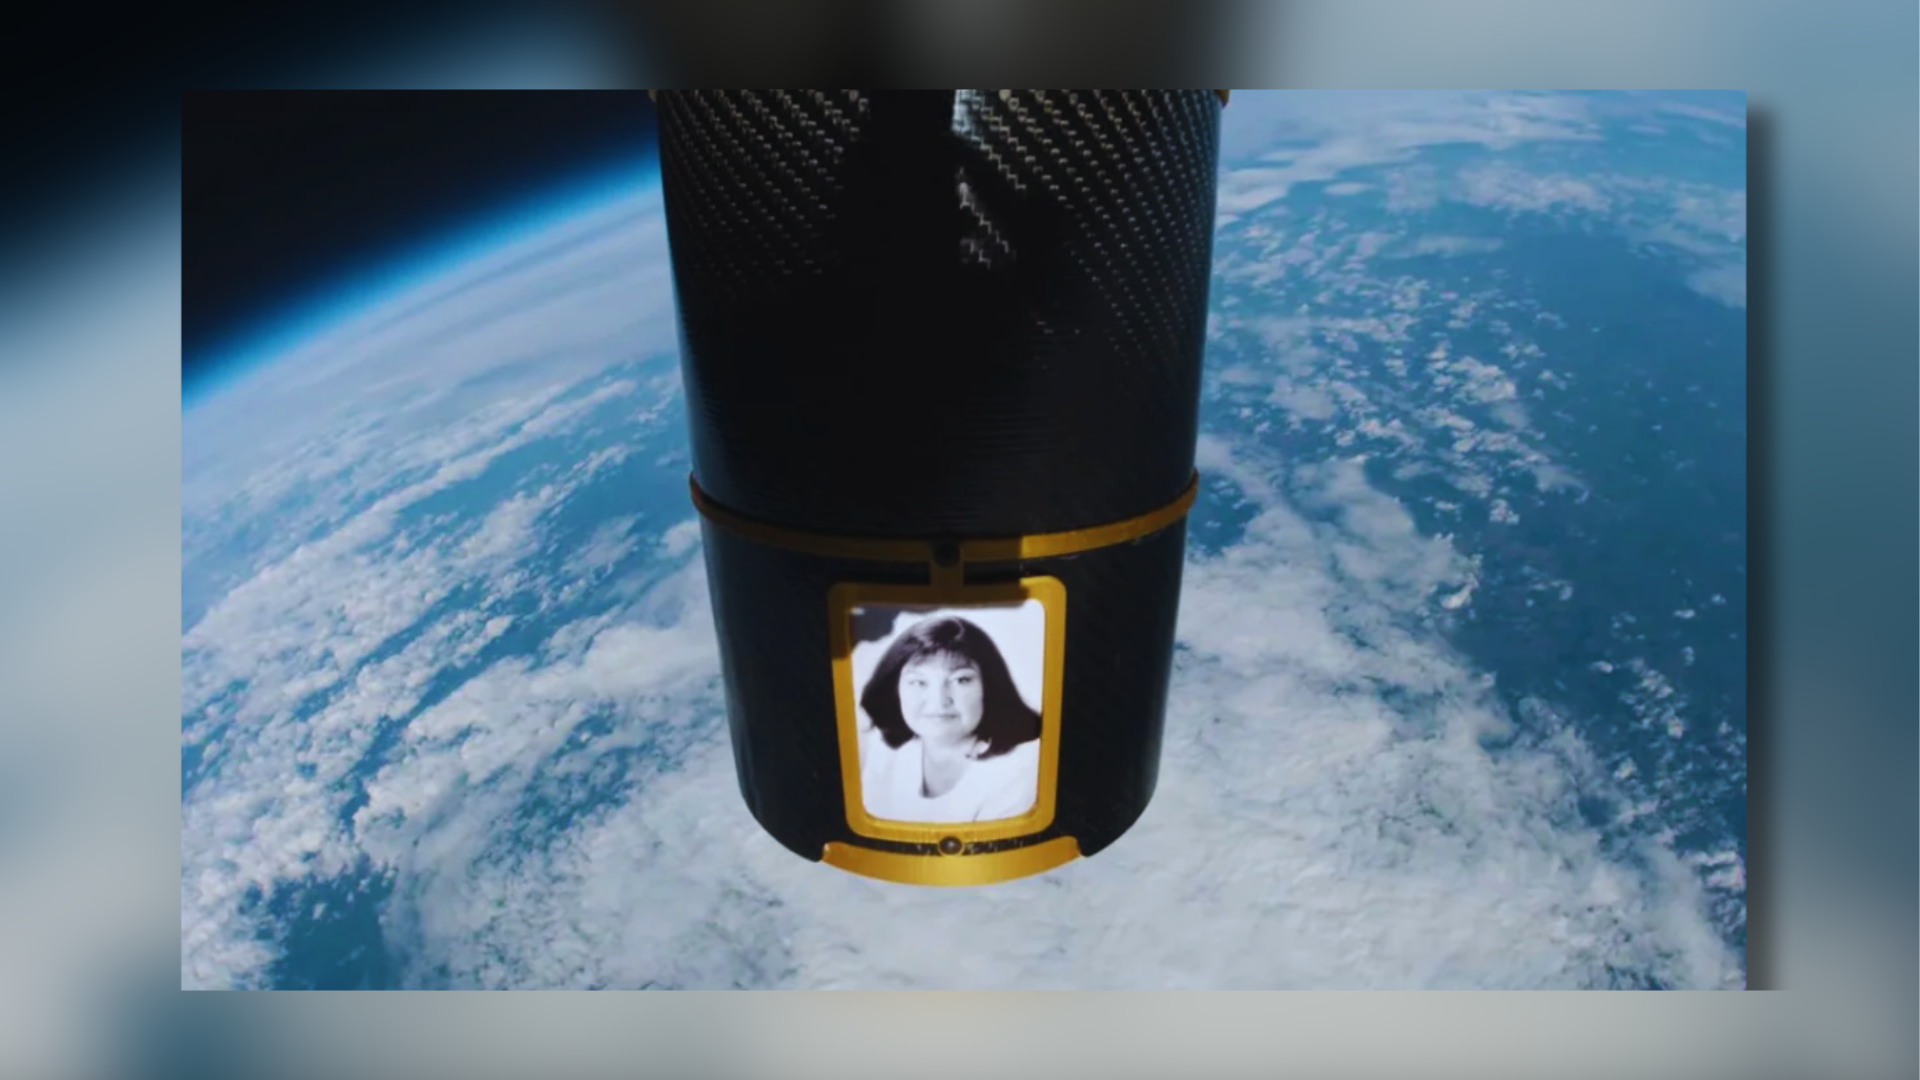 In A Touching Homage, American Woman’s Ashes Soar And Dissipate Among The Stars